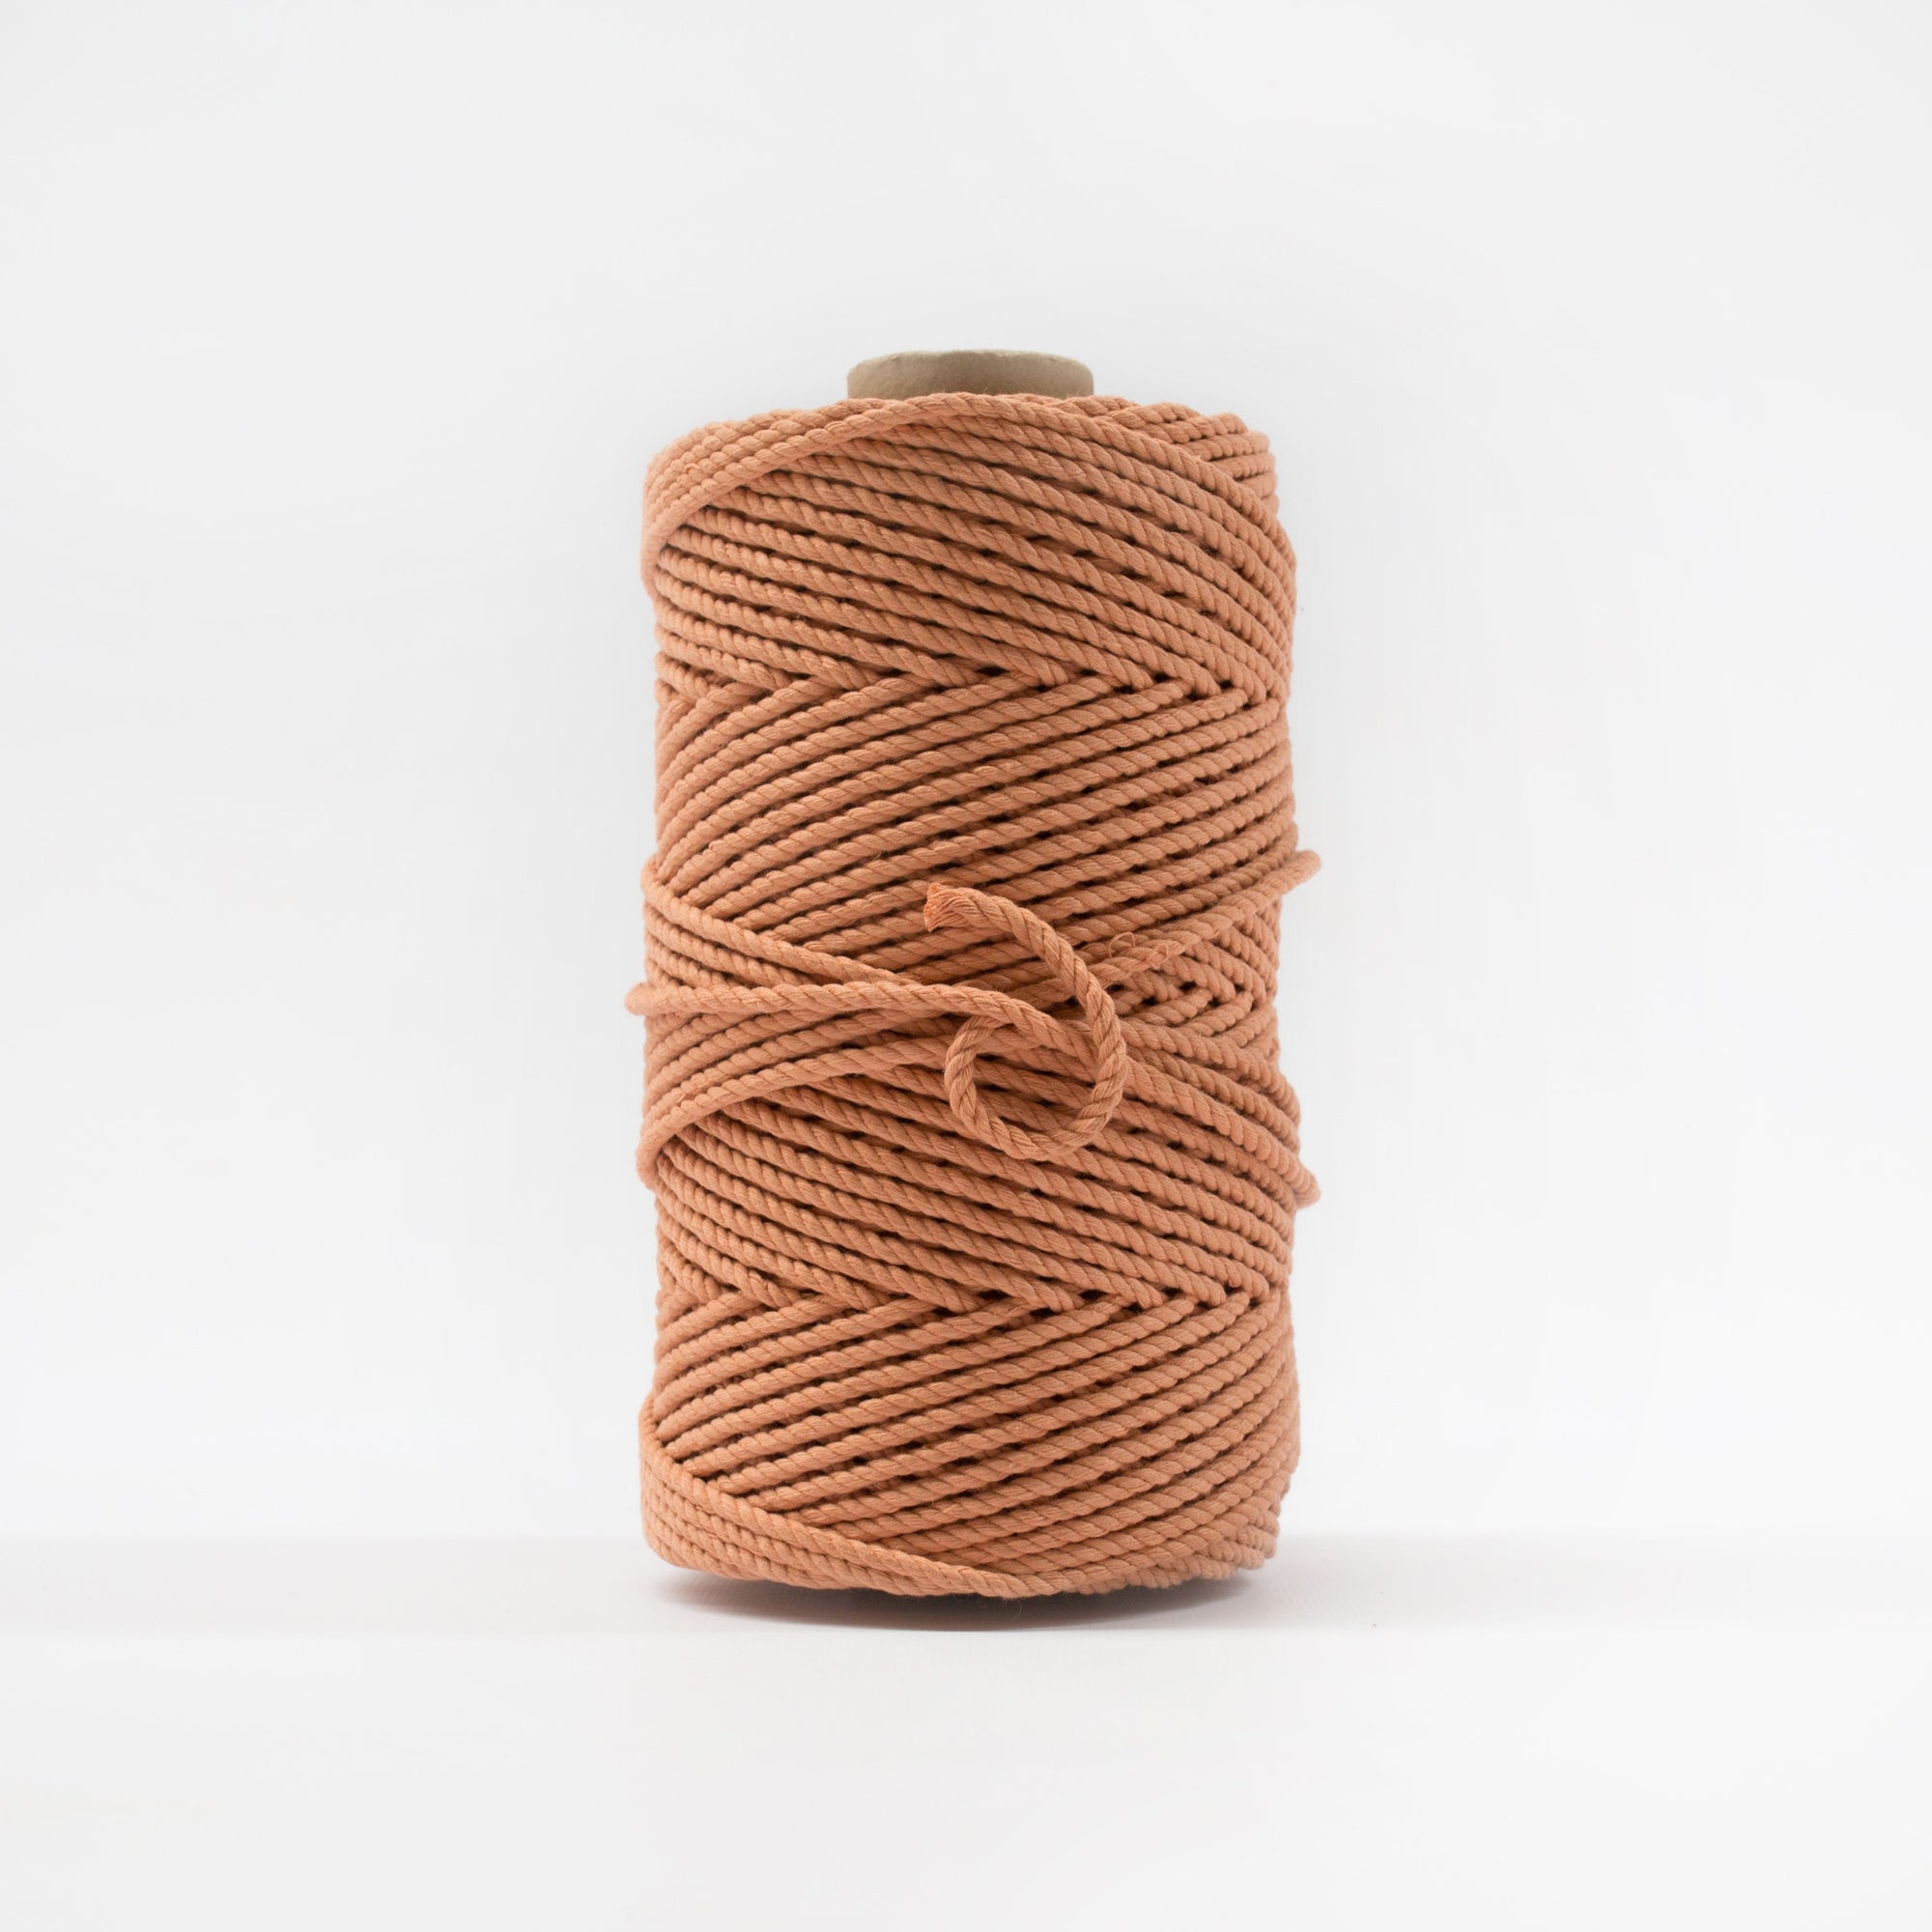 Mary Maker Studio Luxe Colour Cotton 4mm 1KG Recycled Luxe Macrame Rope // Peach macrame cotton macrame rope macrame workshop macrame patterns macrame